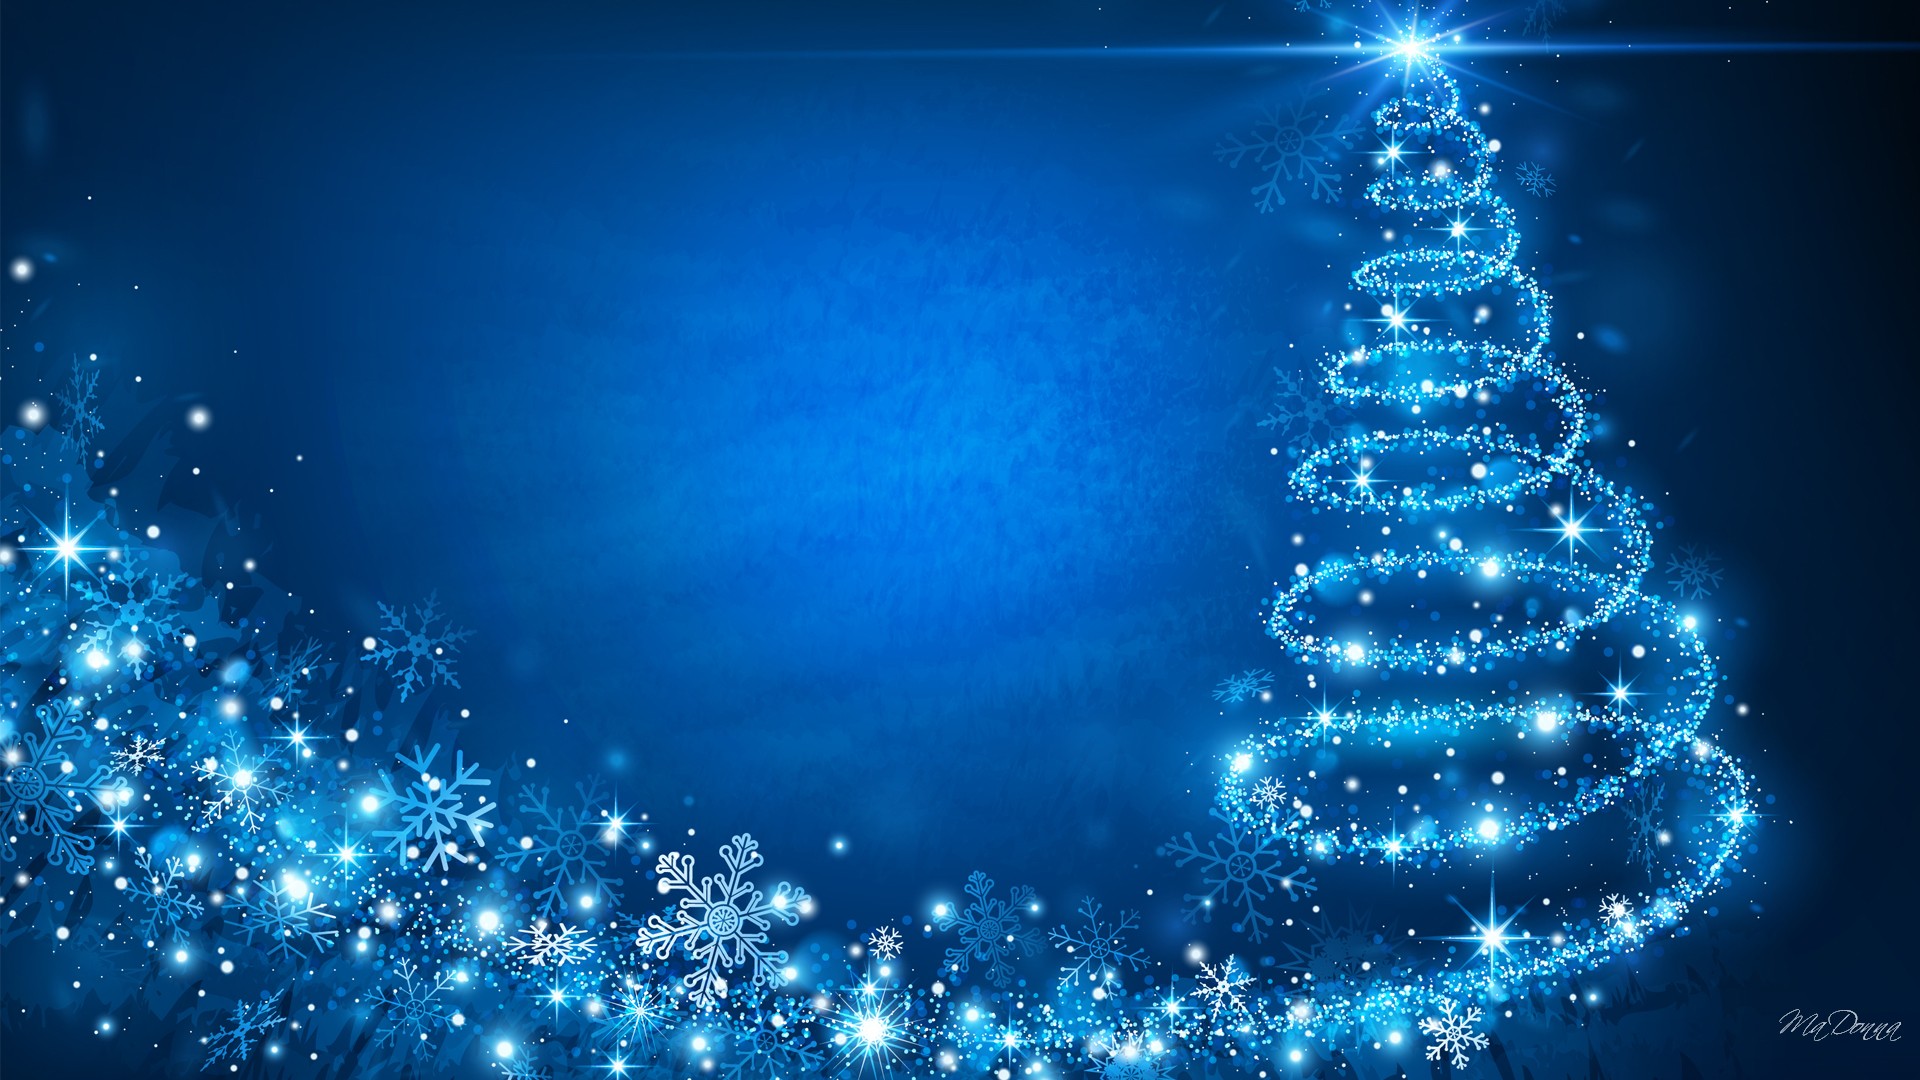 Blue Christmas Background Image Amp Pictures Becuo